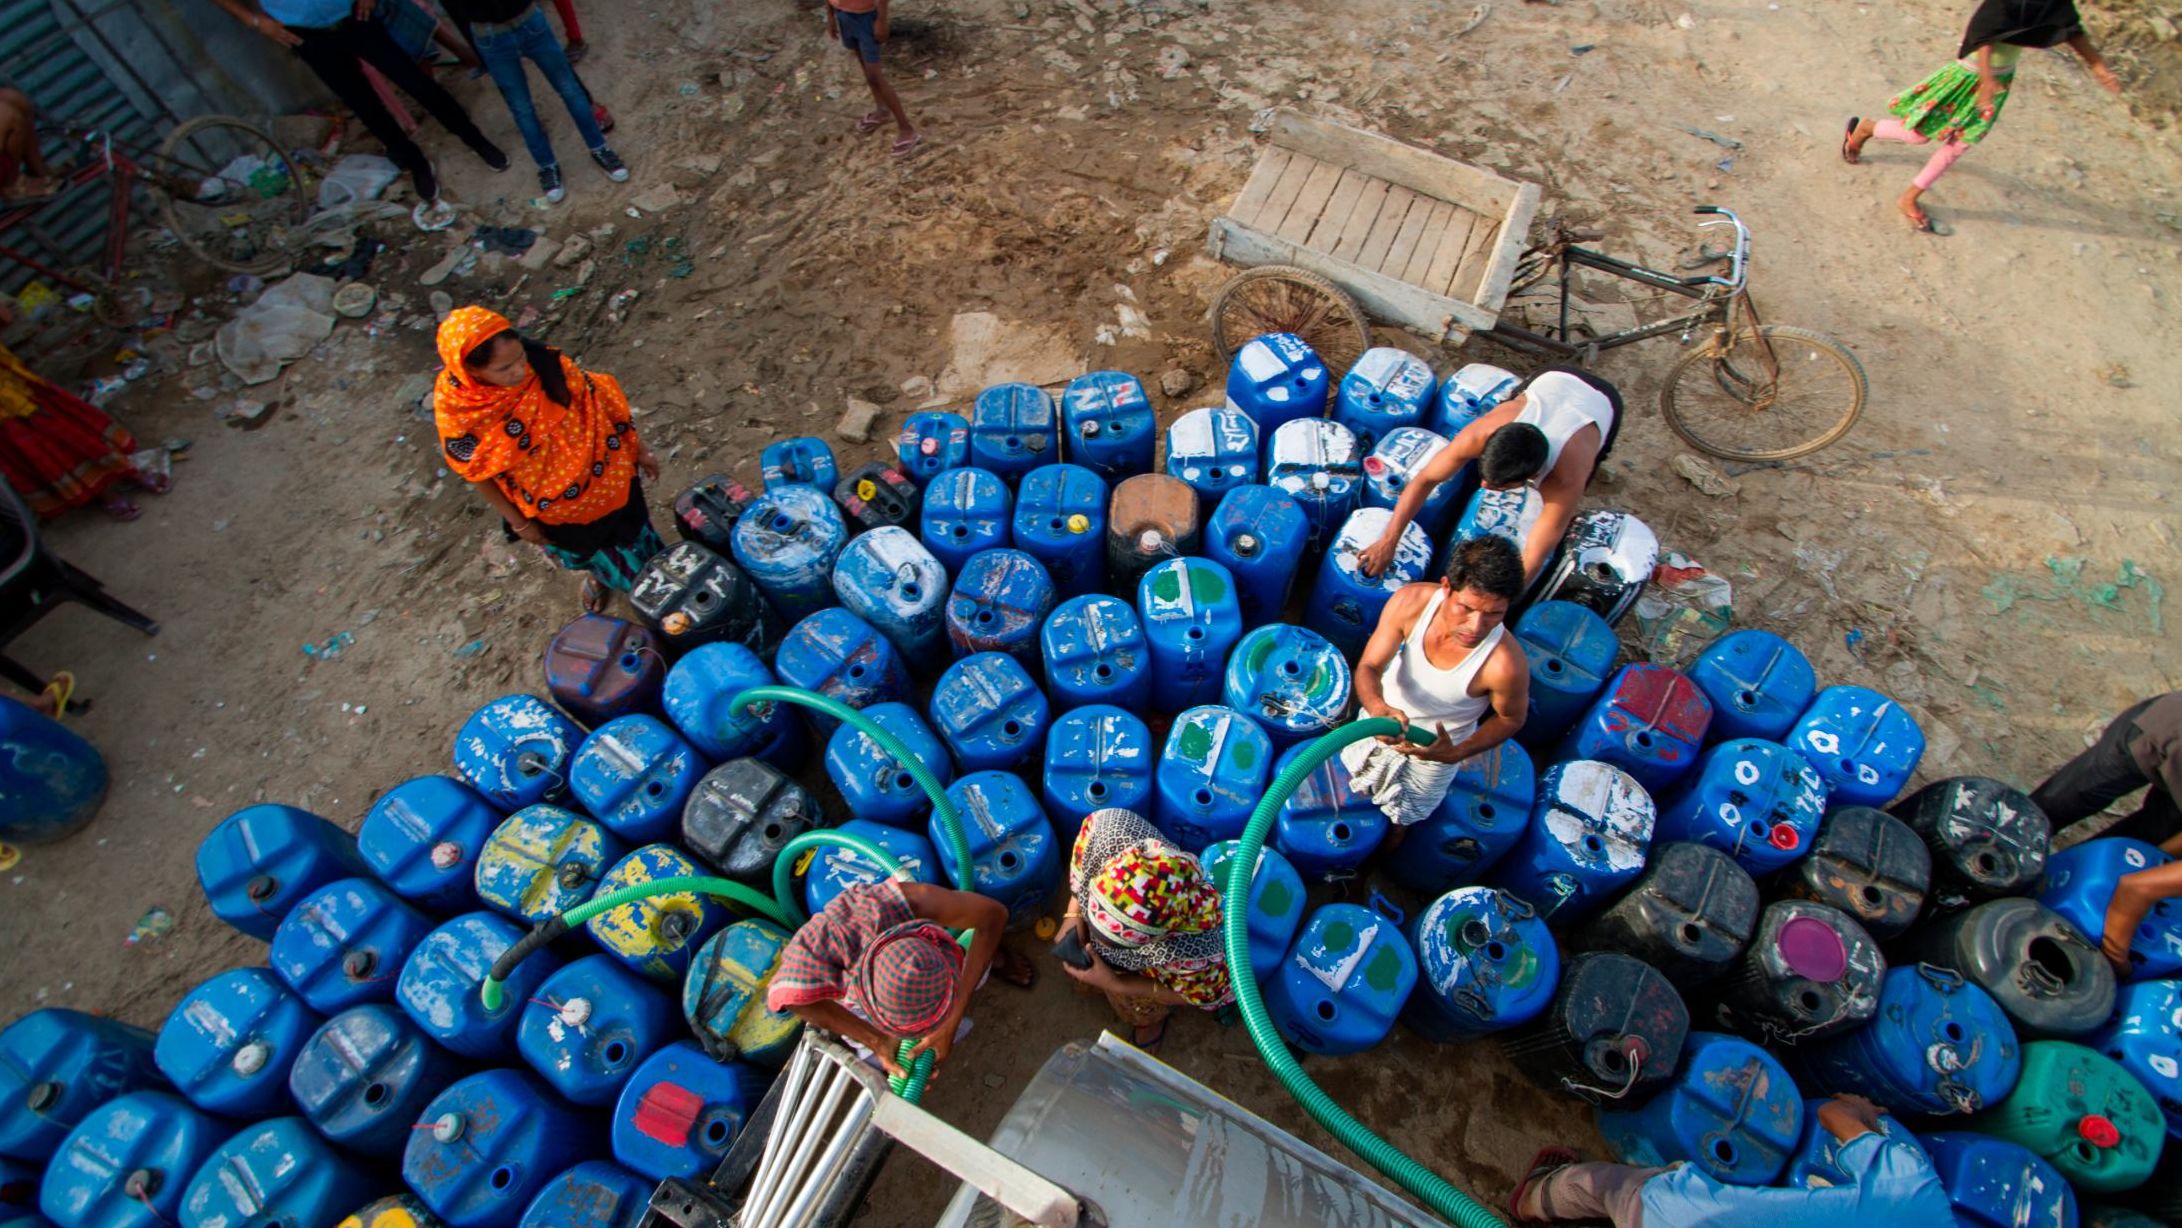 Families must stretch out their allotted water for 10 days. The supply often doesn't last.